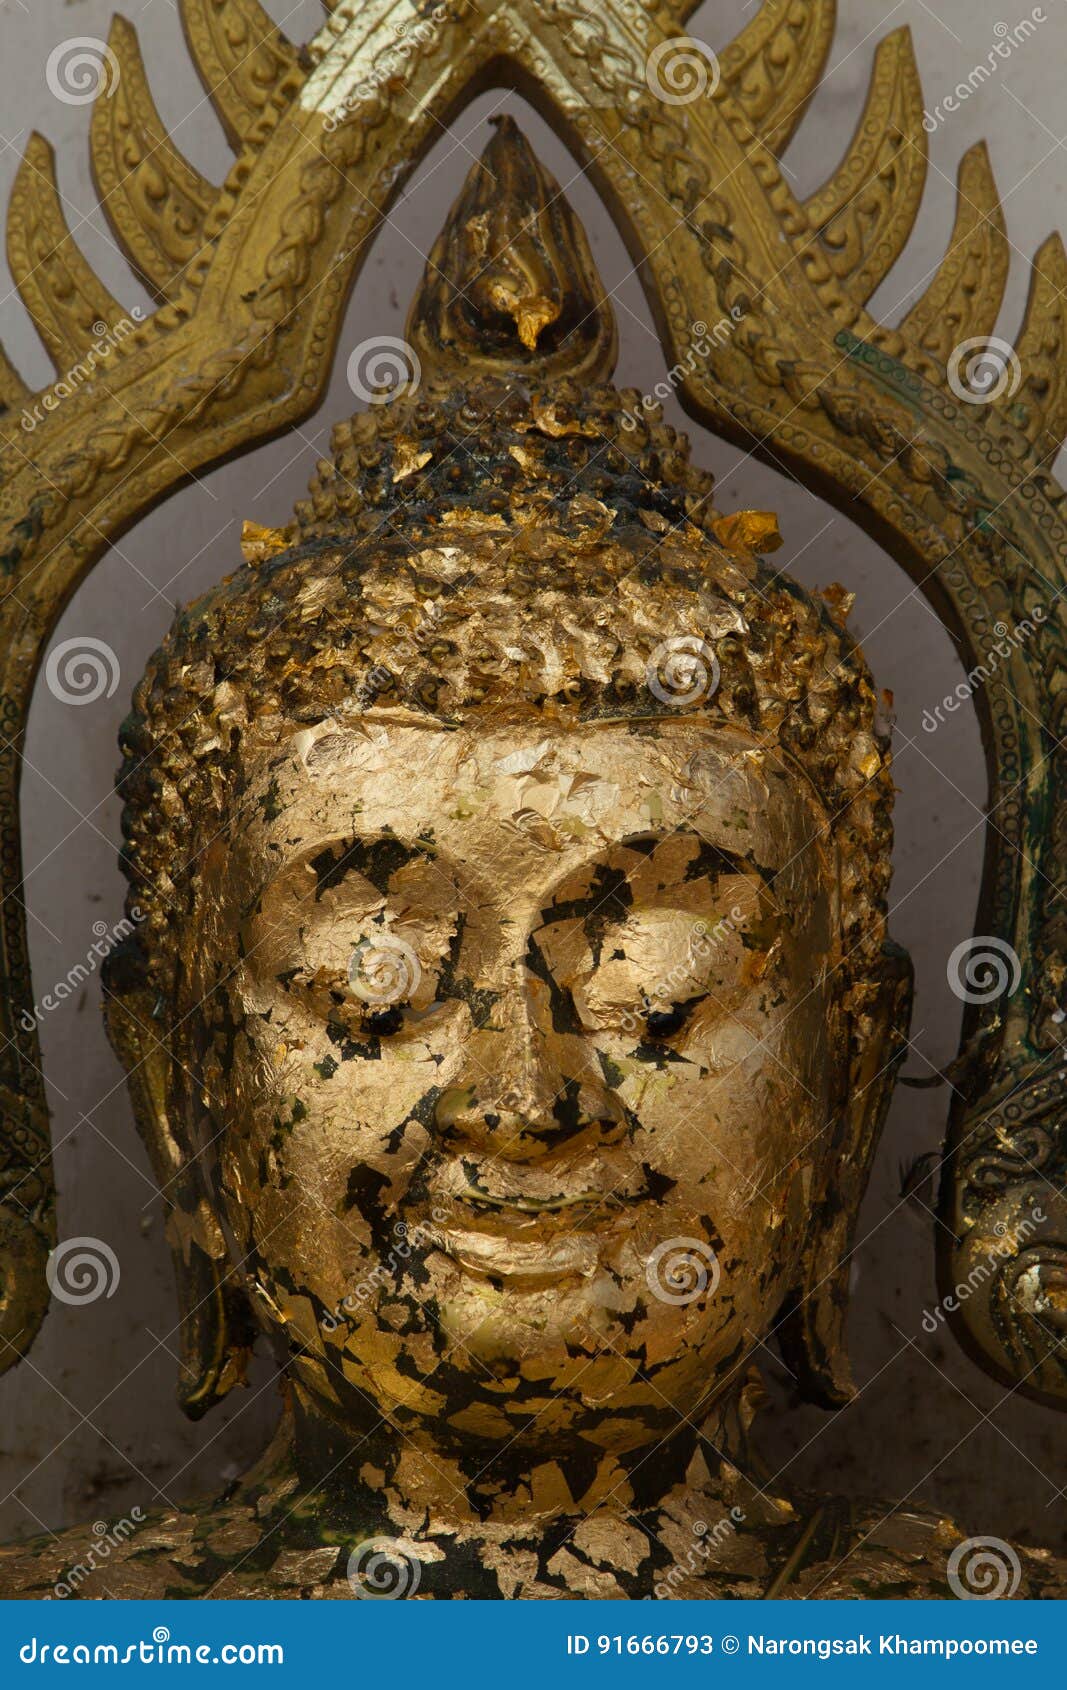 gold plates on face buddha,the buddha statue to gild with gold l